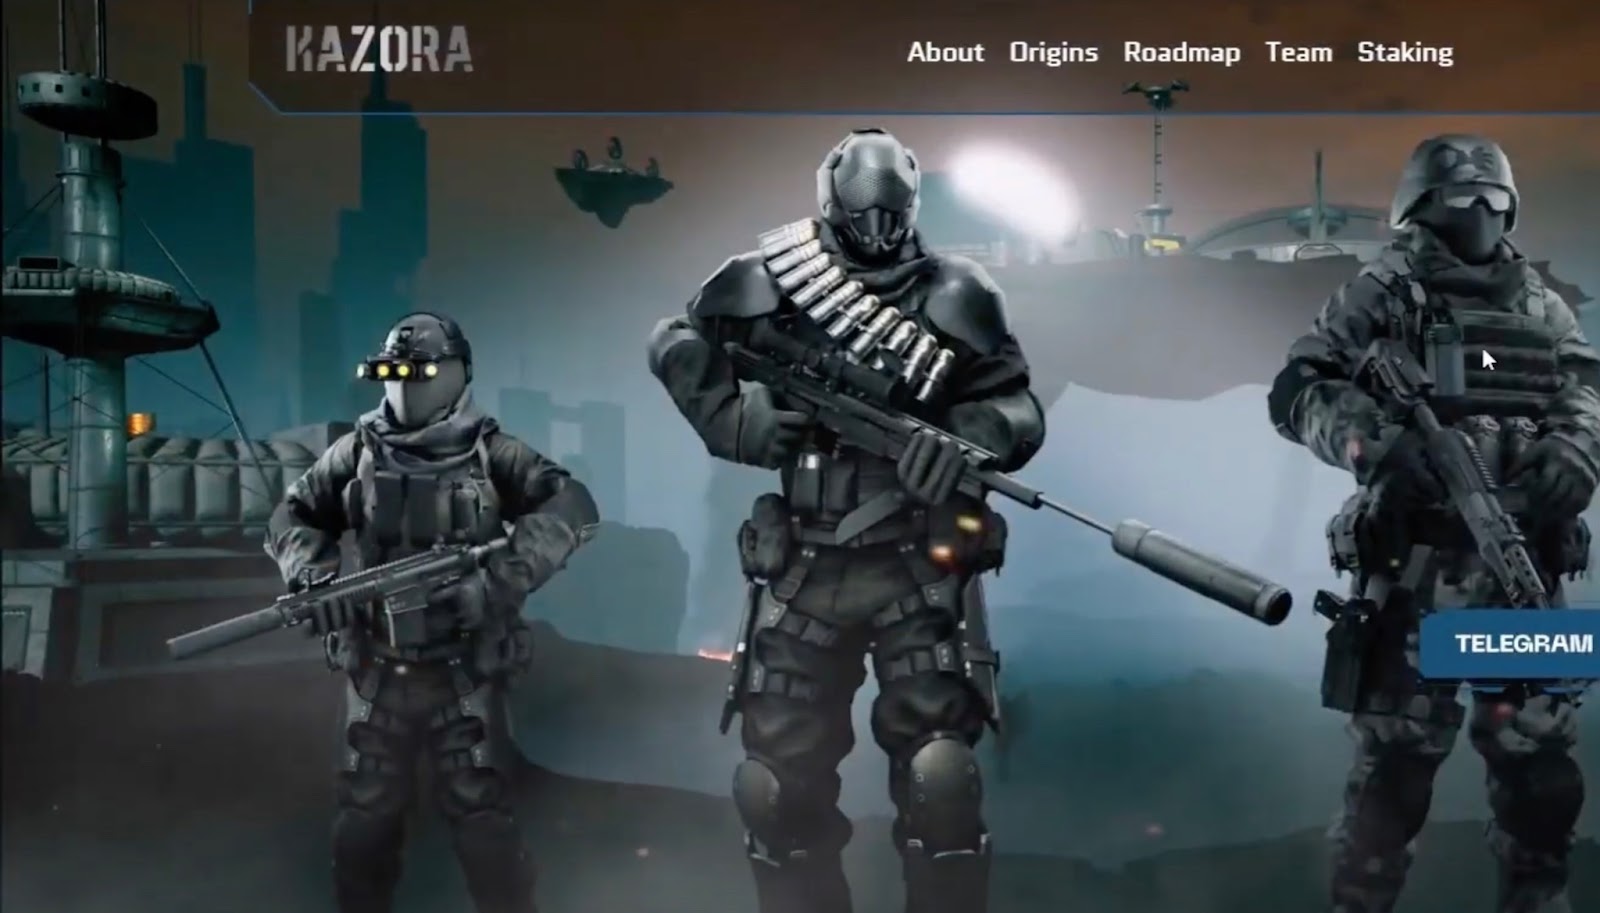 Main menu of the game with characters